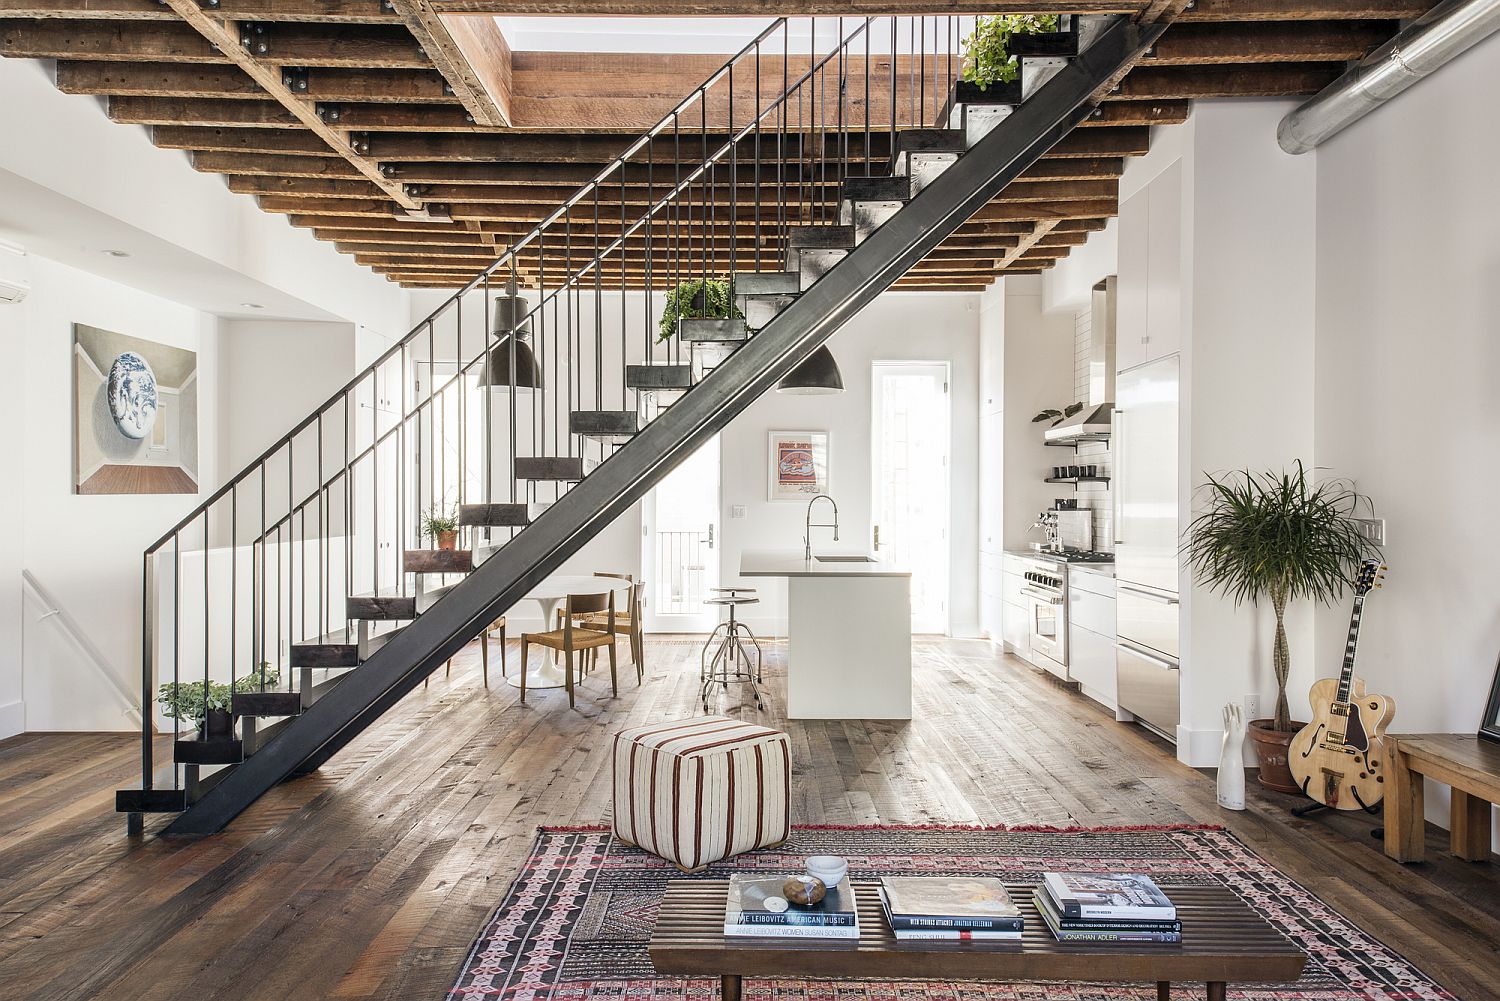 Extensively renovated Lorimer Street Townhouse with modern industrial charm